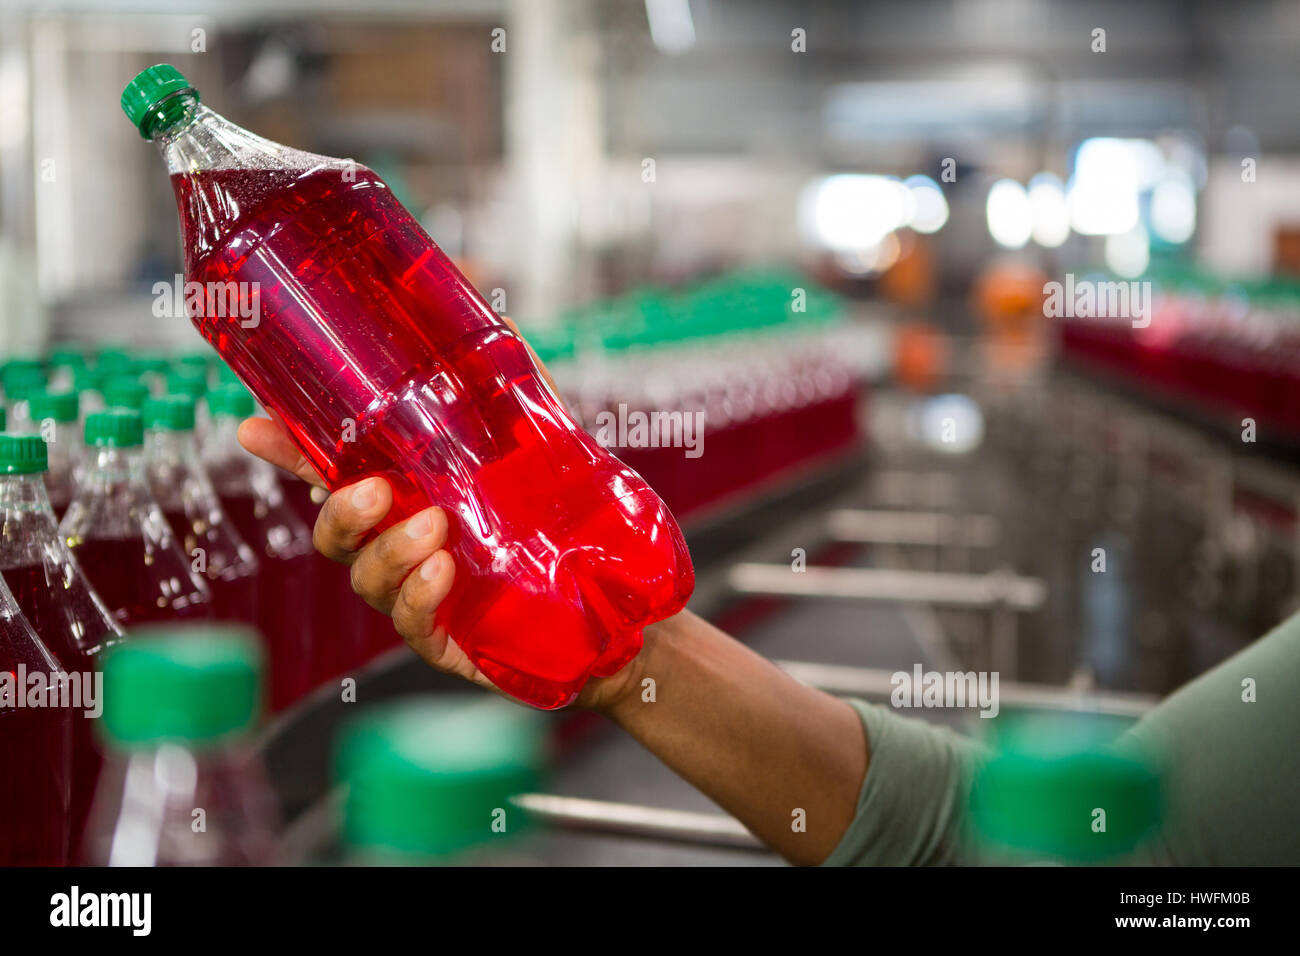 Cropped hand of worker holding red juice bottle in factory Stock Photo